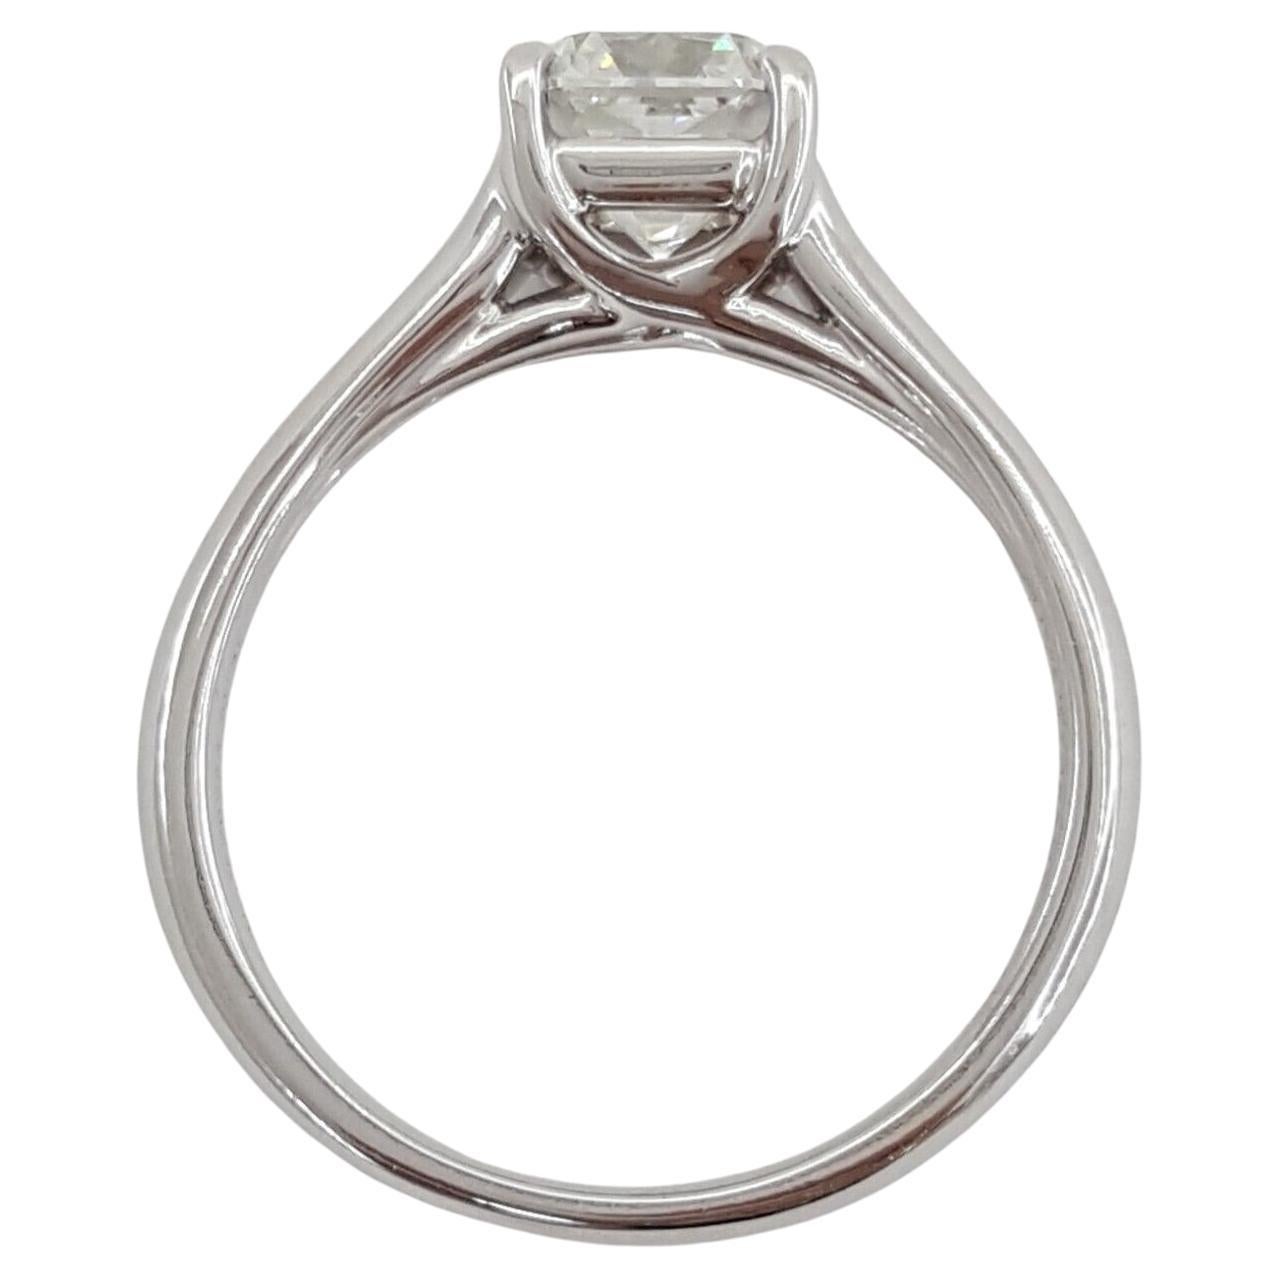 Tiffany & Co. Platinum 1.70 ct Lucida Rectangular Brilliant Cut Diamond Solitaire Engagement Ring.



The ring weighs 6.5 grams, size 4.5, the center stone is a Natural Lucida Square Brilliant Cut diamond weighing 1.70 ct, F in color, VS1 in